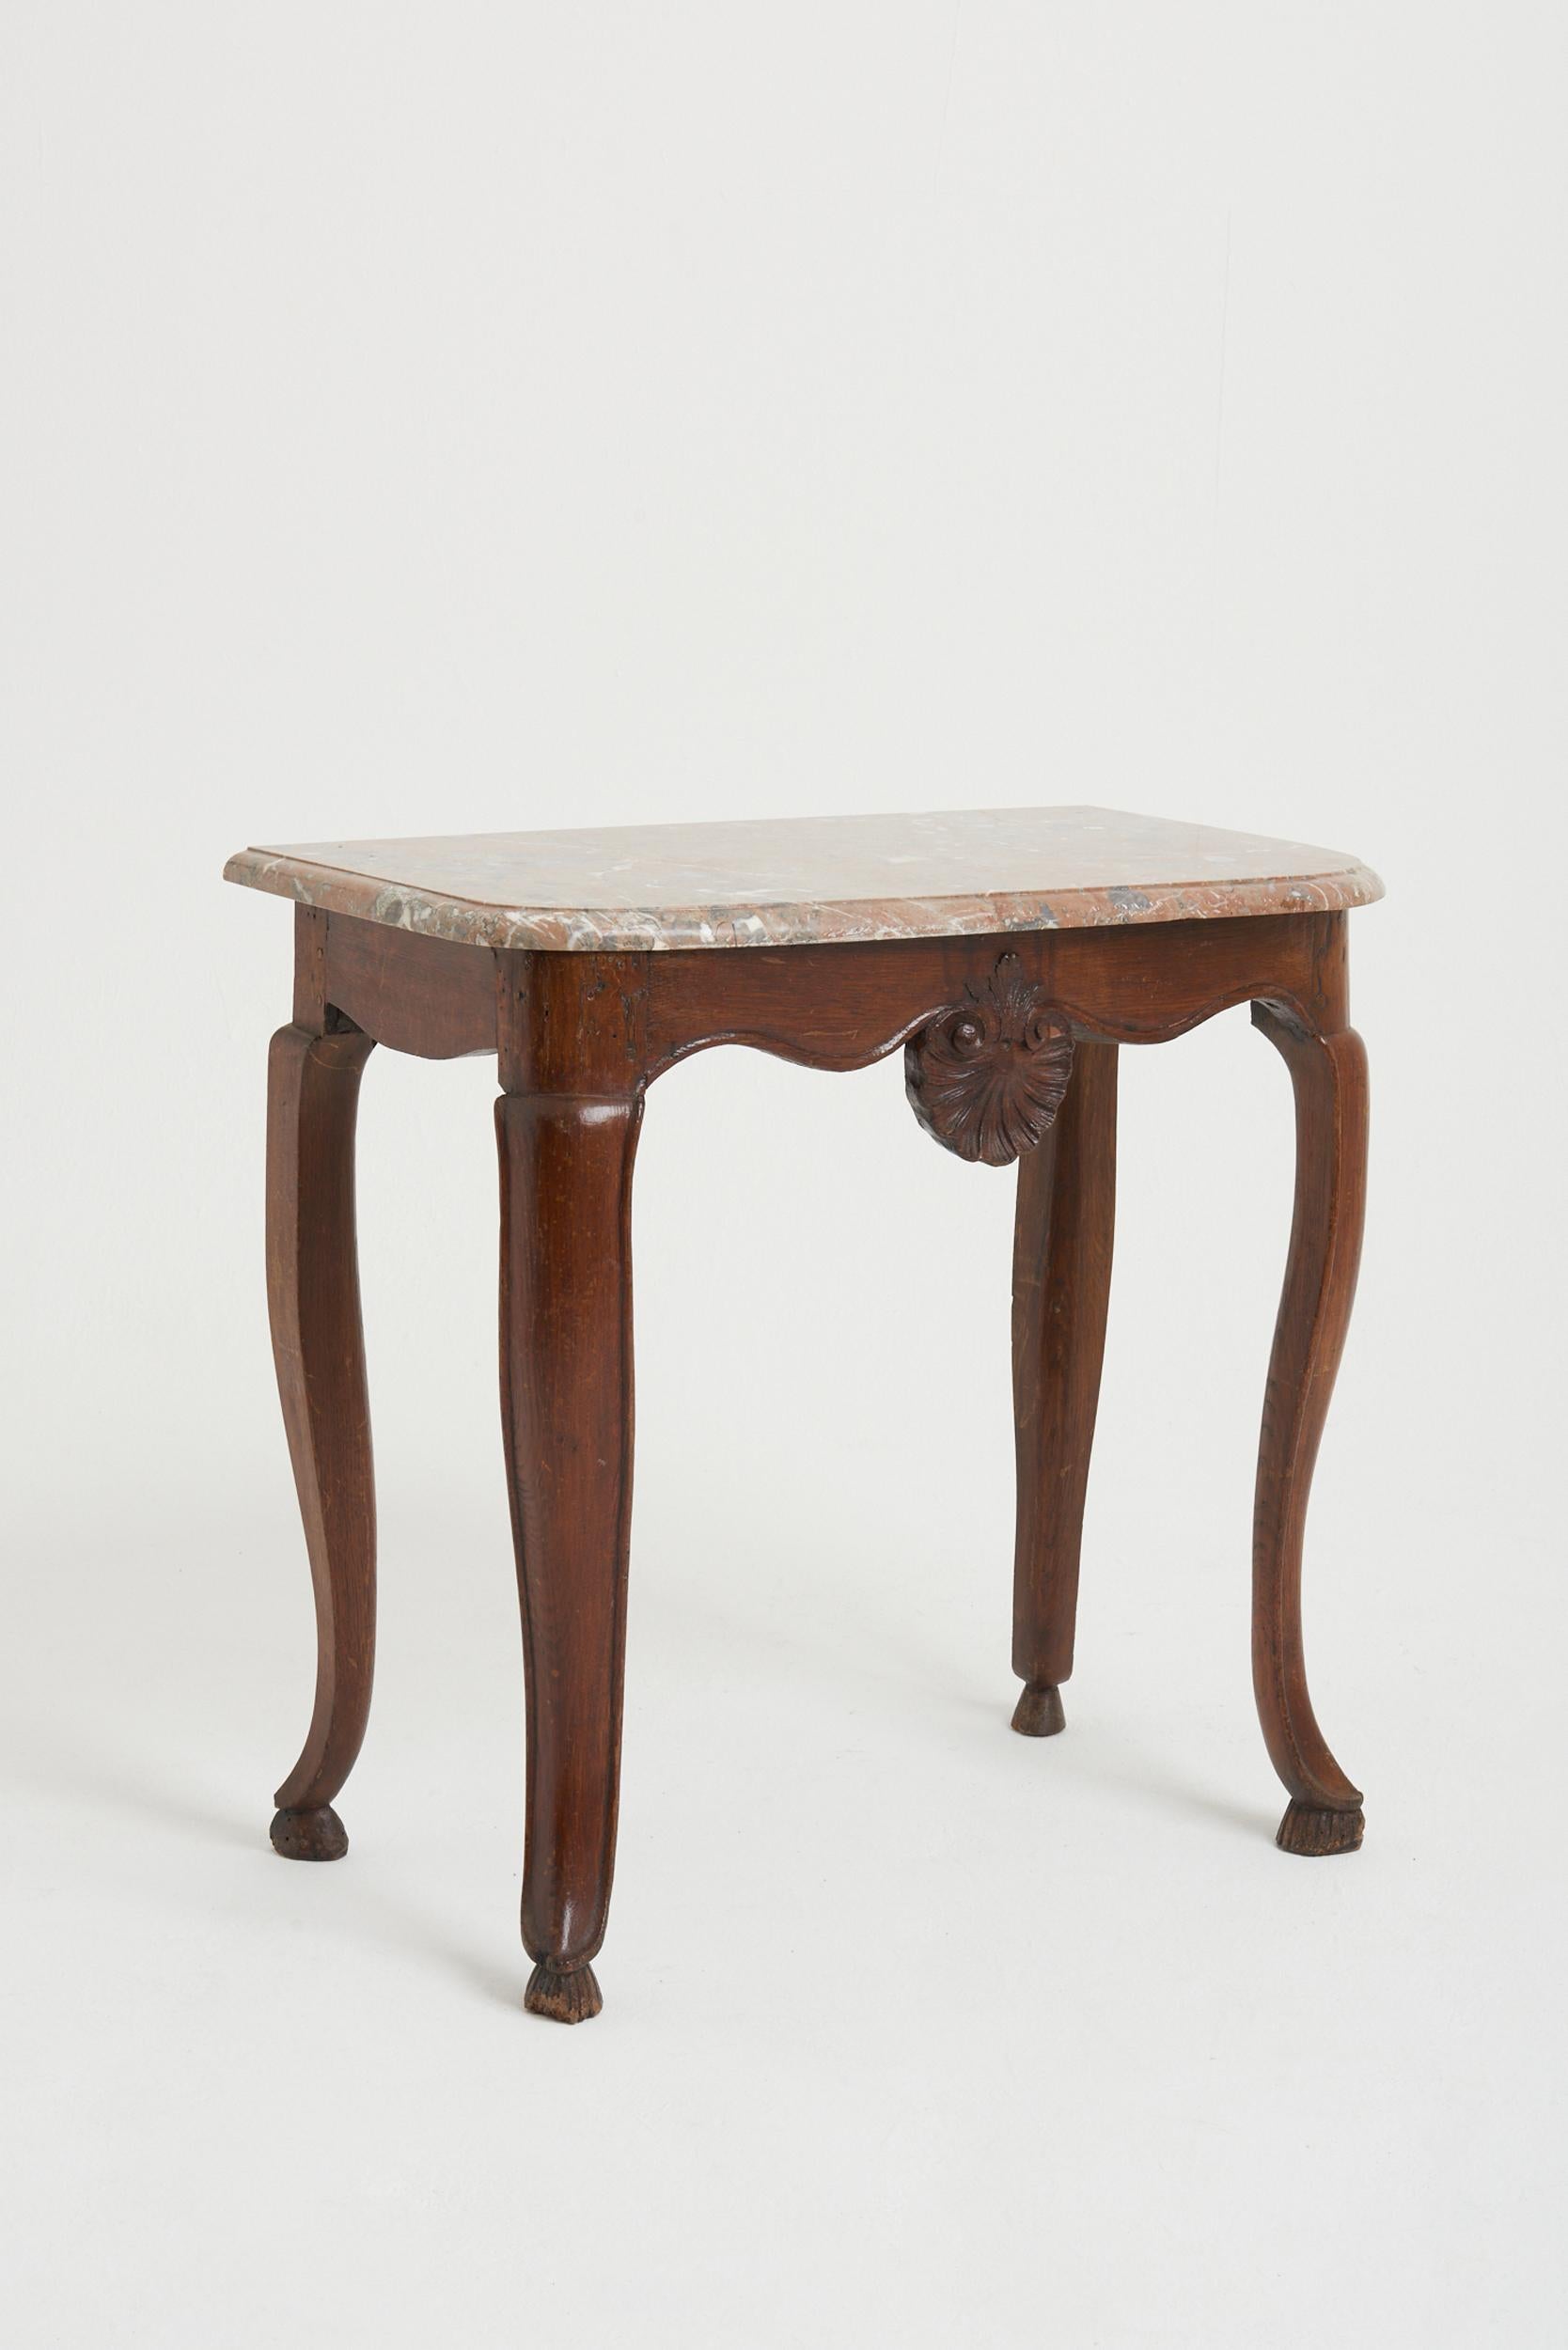 A provincial Louis XV period carved oak and marble top console table.
France, circa 1750.